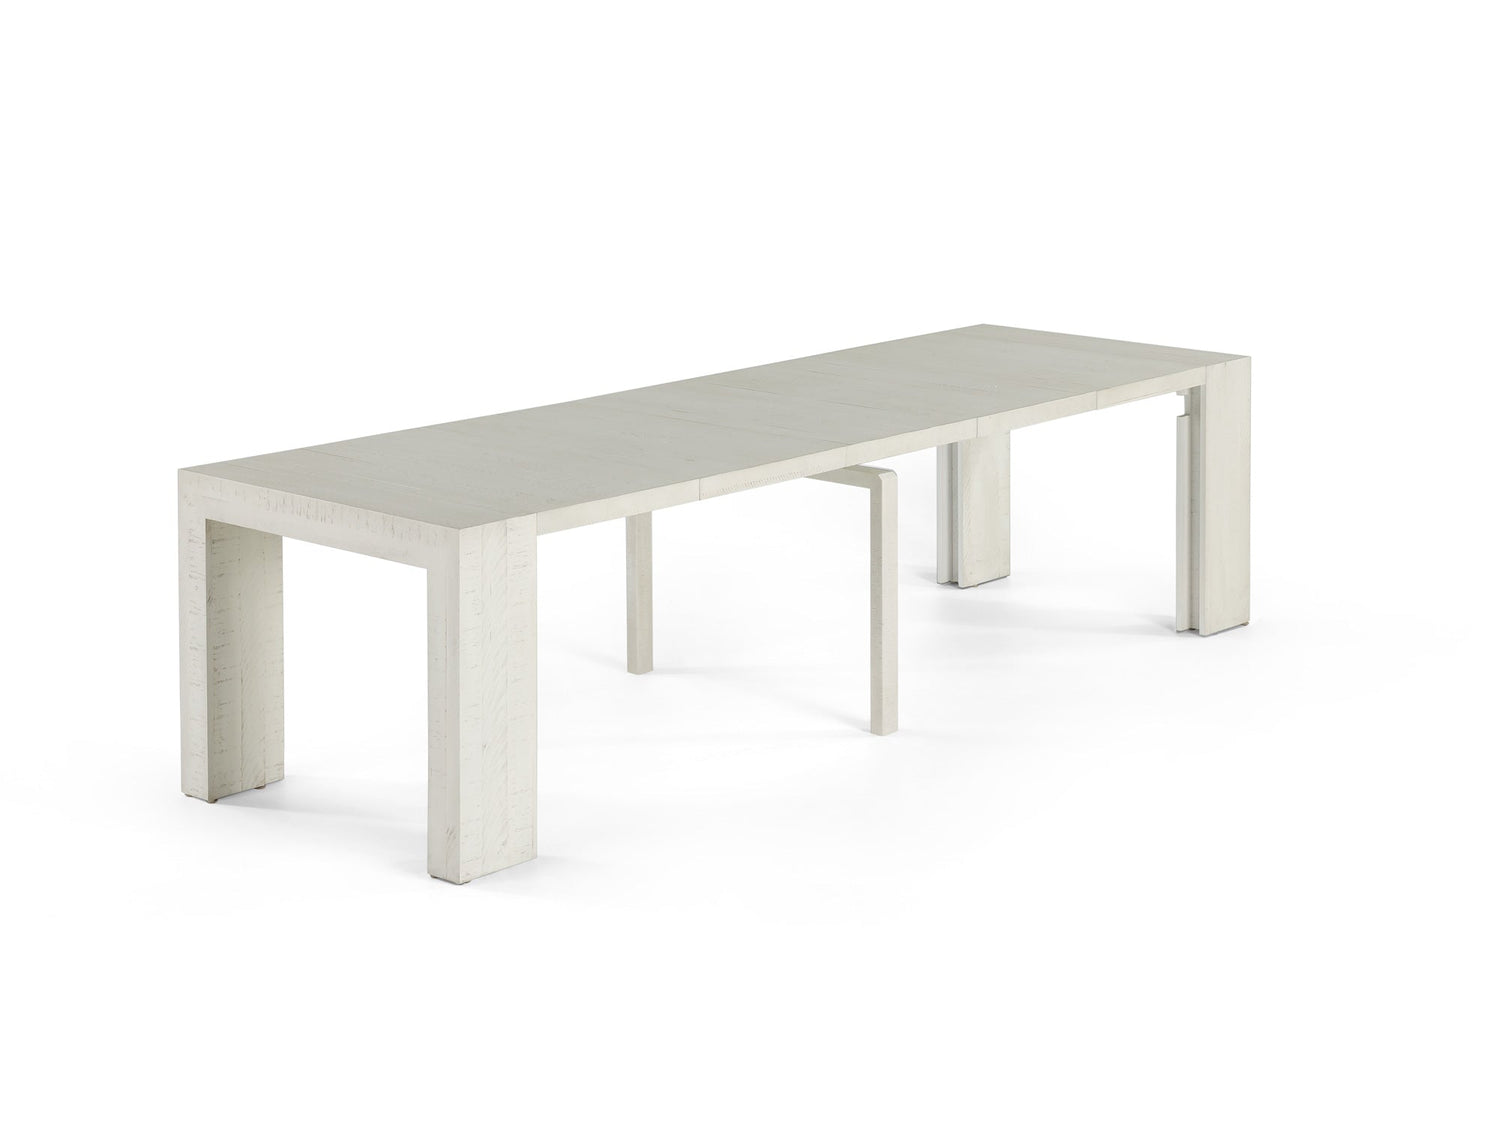 Canadian Birch::Gallery::Expanded Canadian Birch Transformer Table Showing Removable Panels